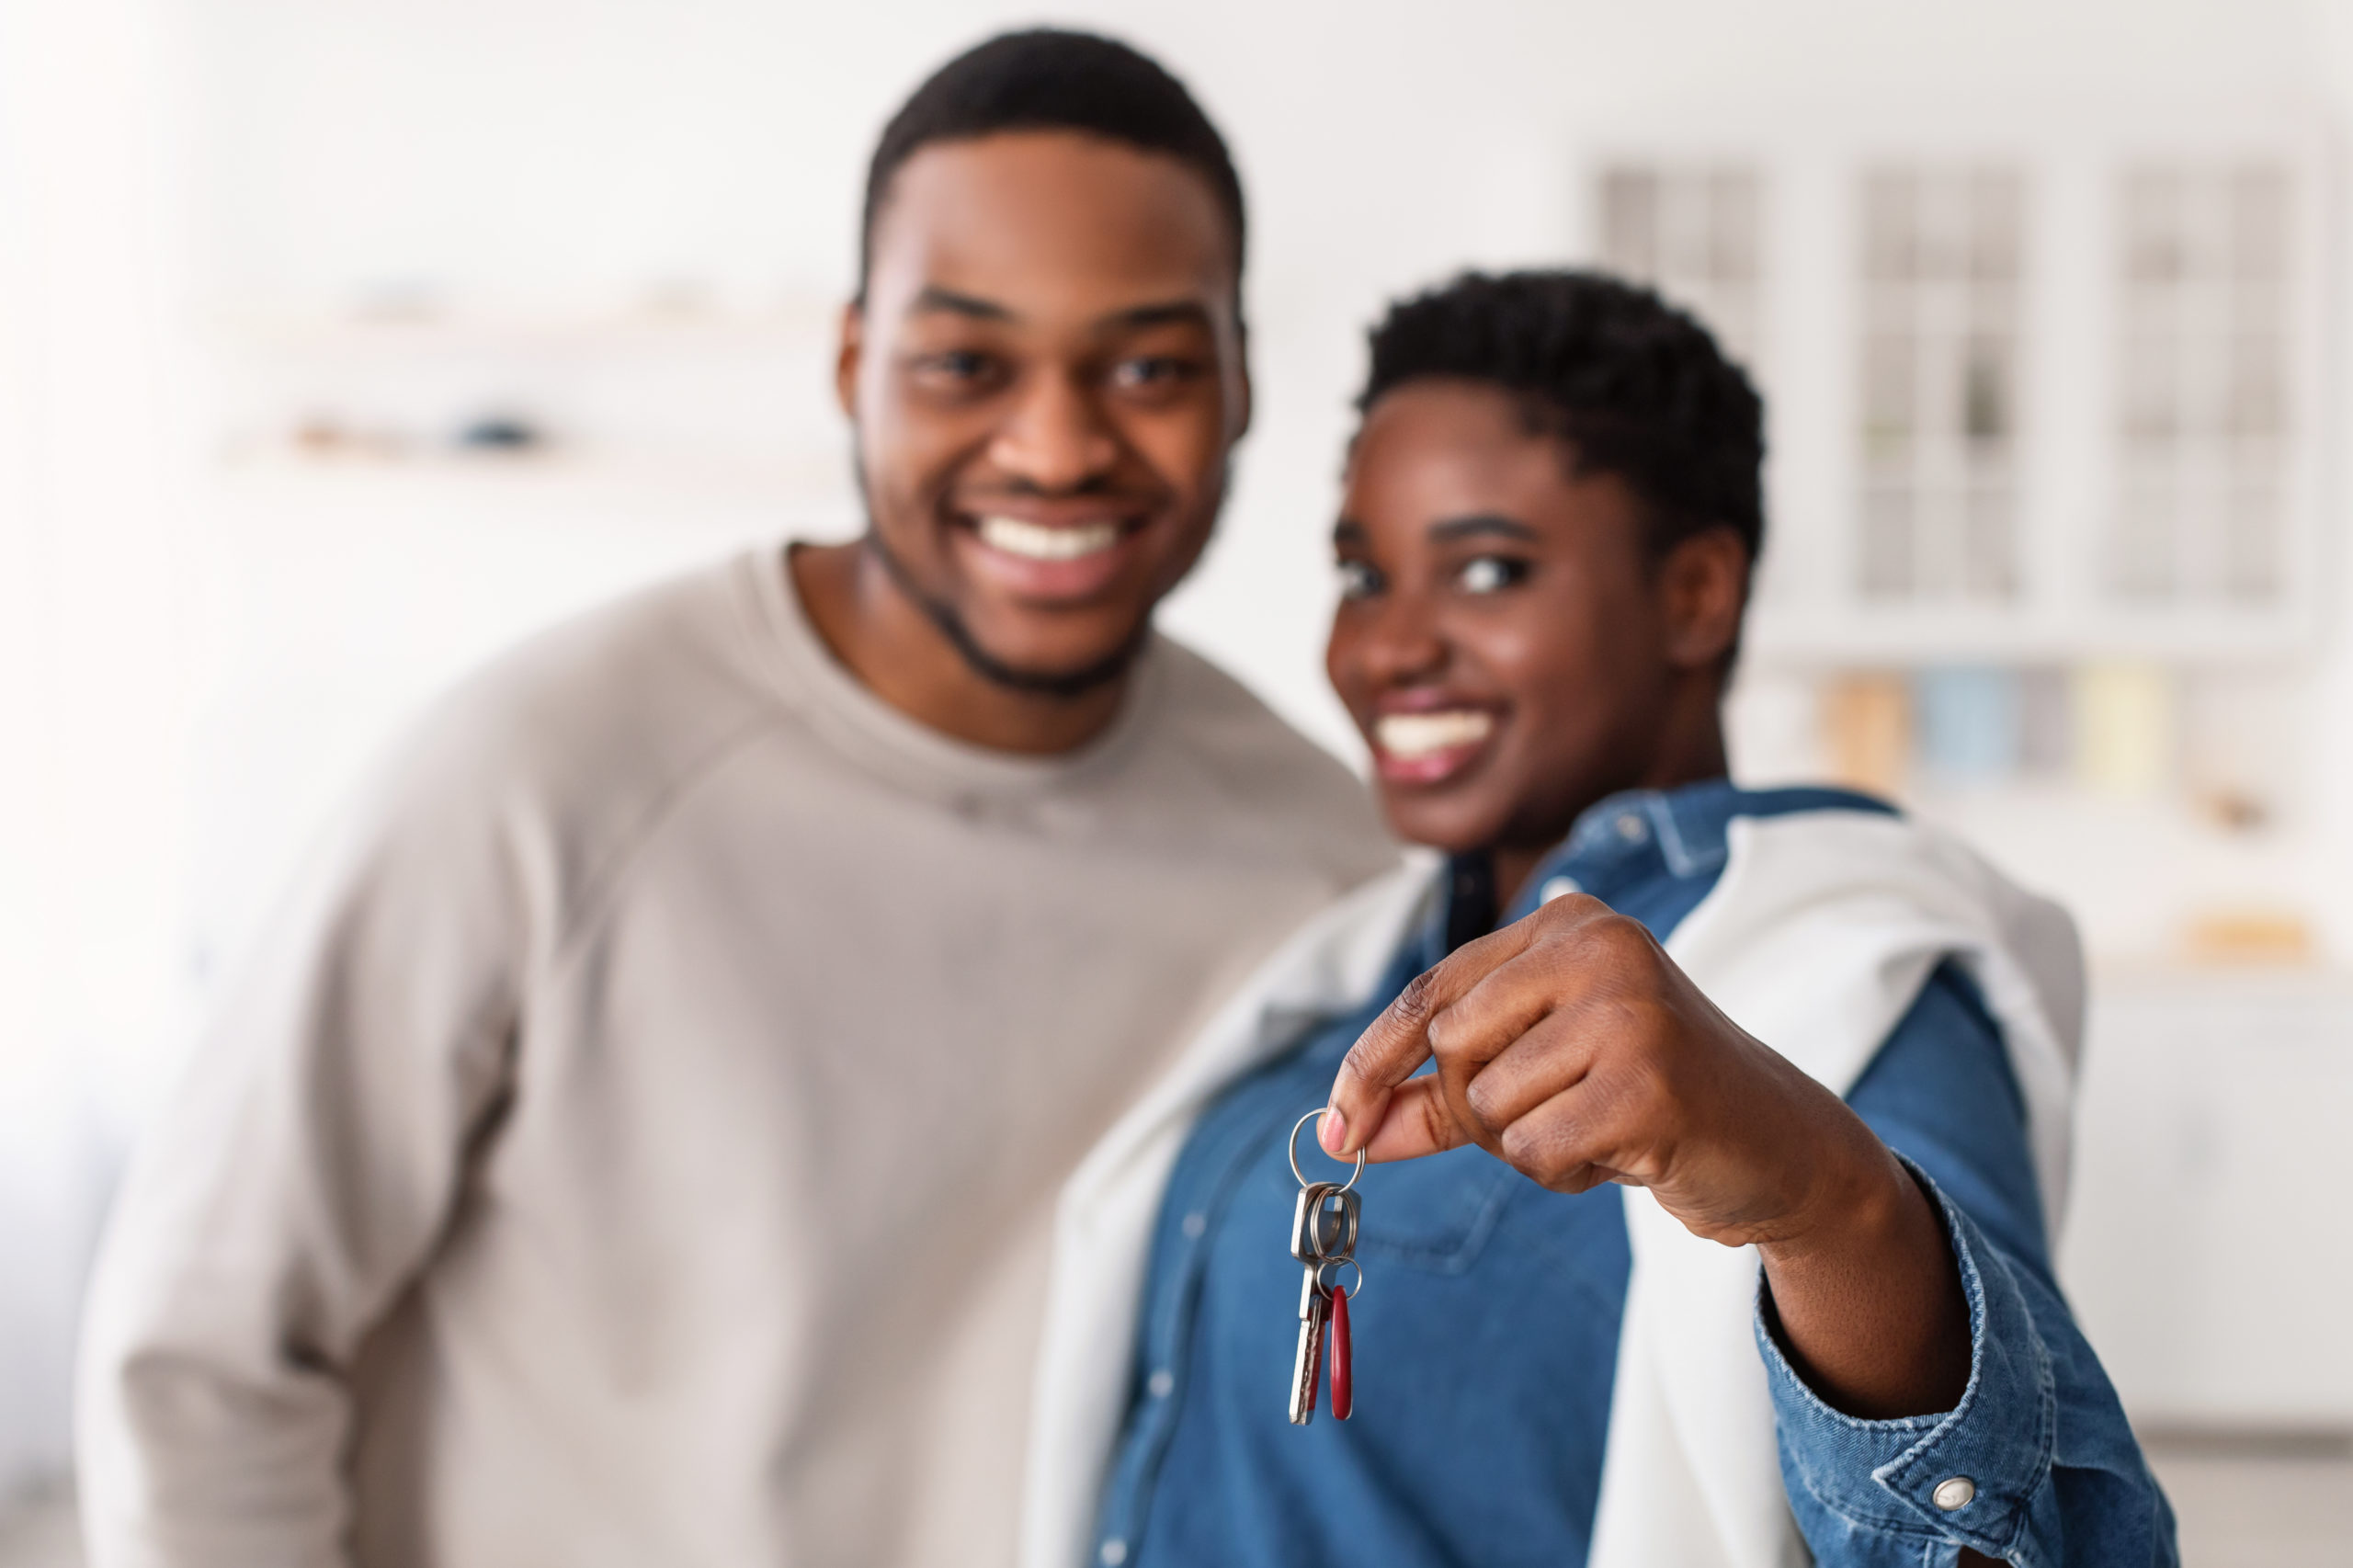 Found a New Home? Here Are the Next Steps